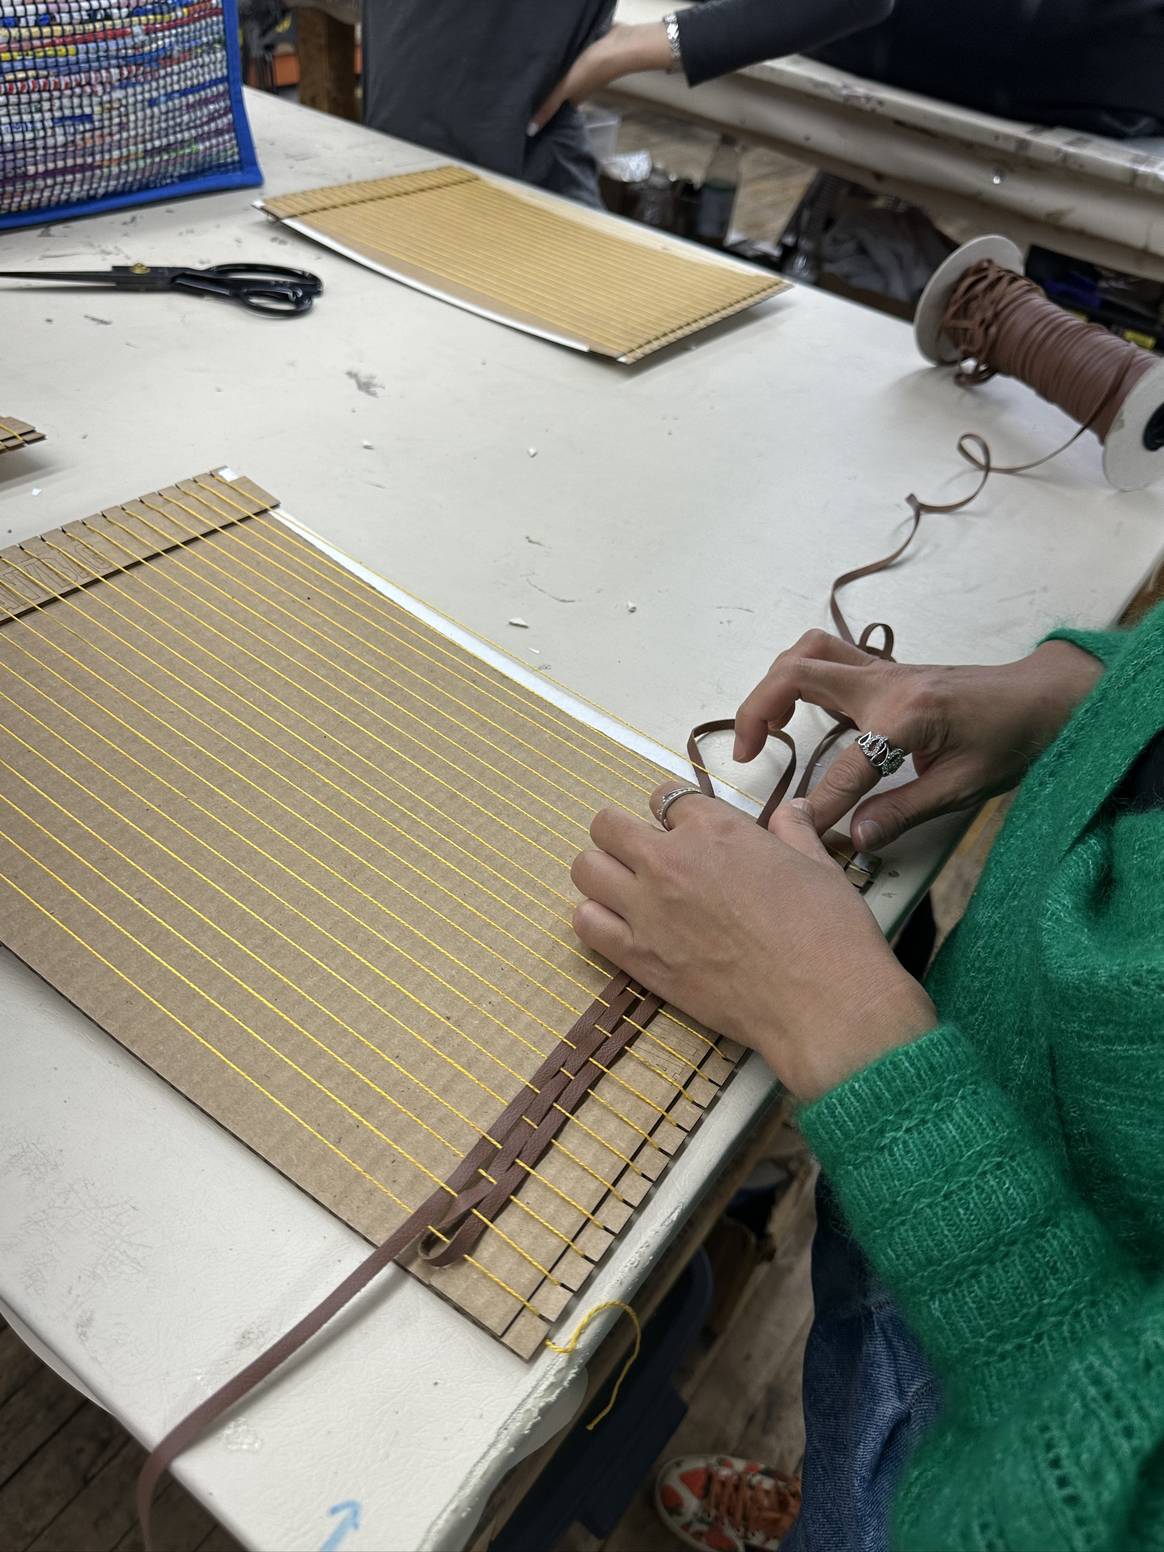 EMiLUX students learn how to weave during workshop at Anybag factory. Credits: Image courtesy of Anybag.